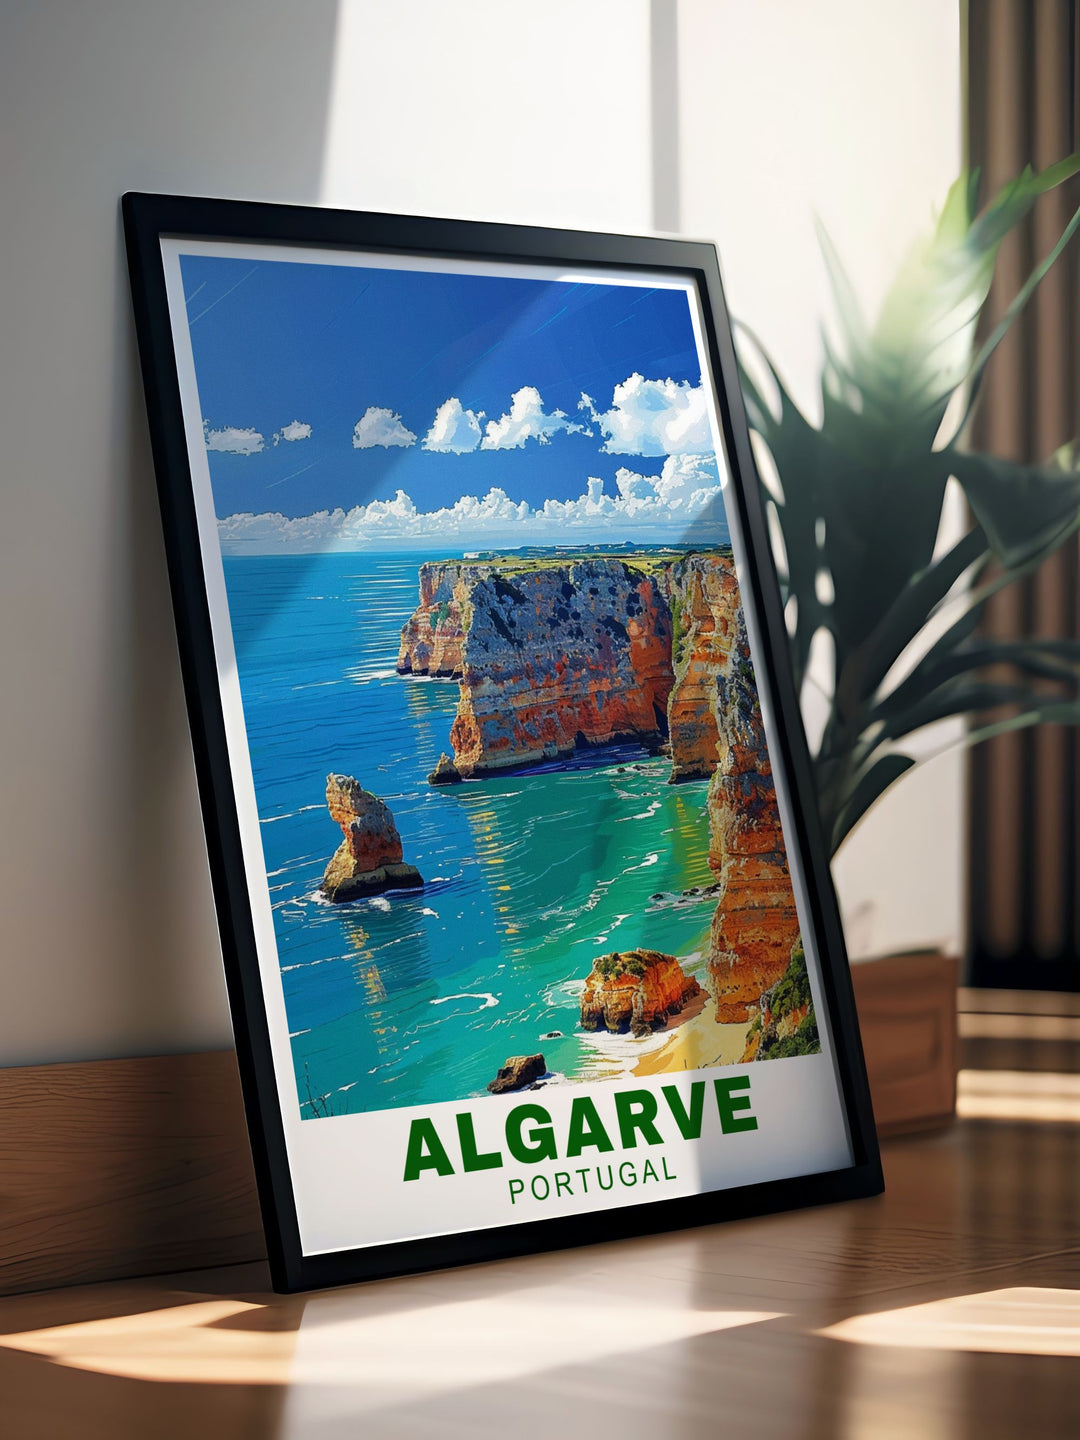 This Algarve cliffs travel poster brings the stunning scenery of Portugals southern coast into your home, with detailed illustrations of its iconic landscapes, ideal for any decor.